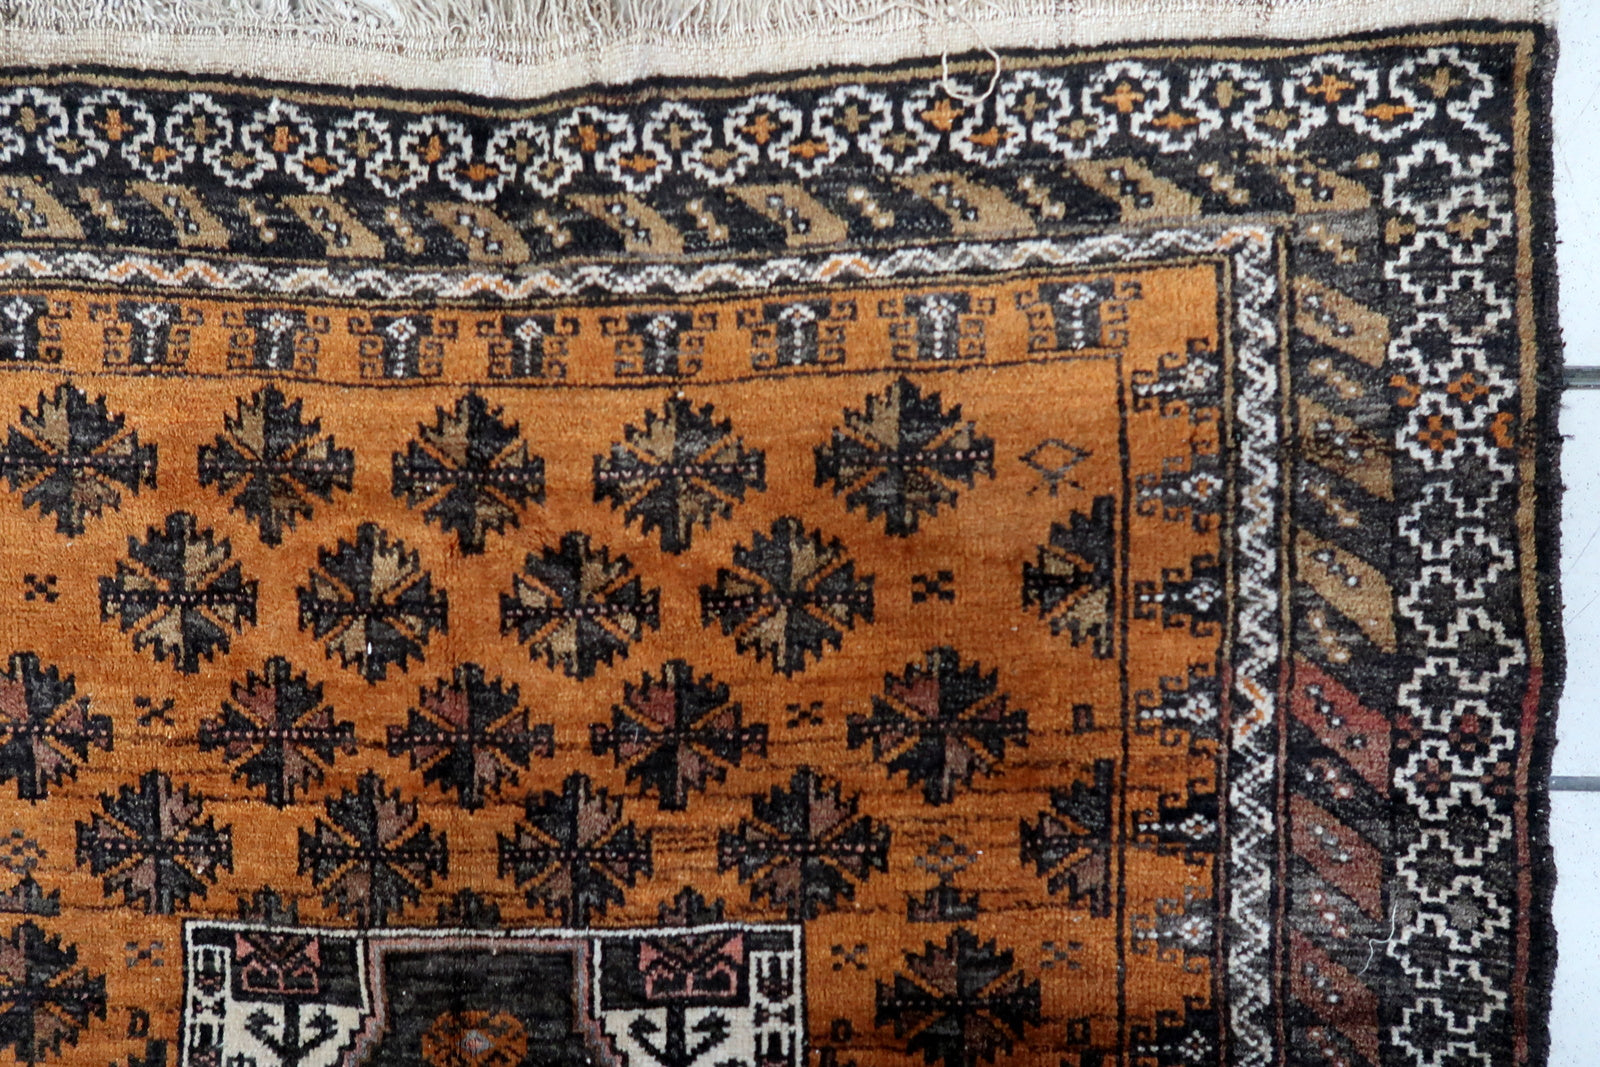 Close-up of the intricate geometric patterns in black and white on the rug's surface